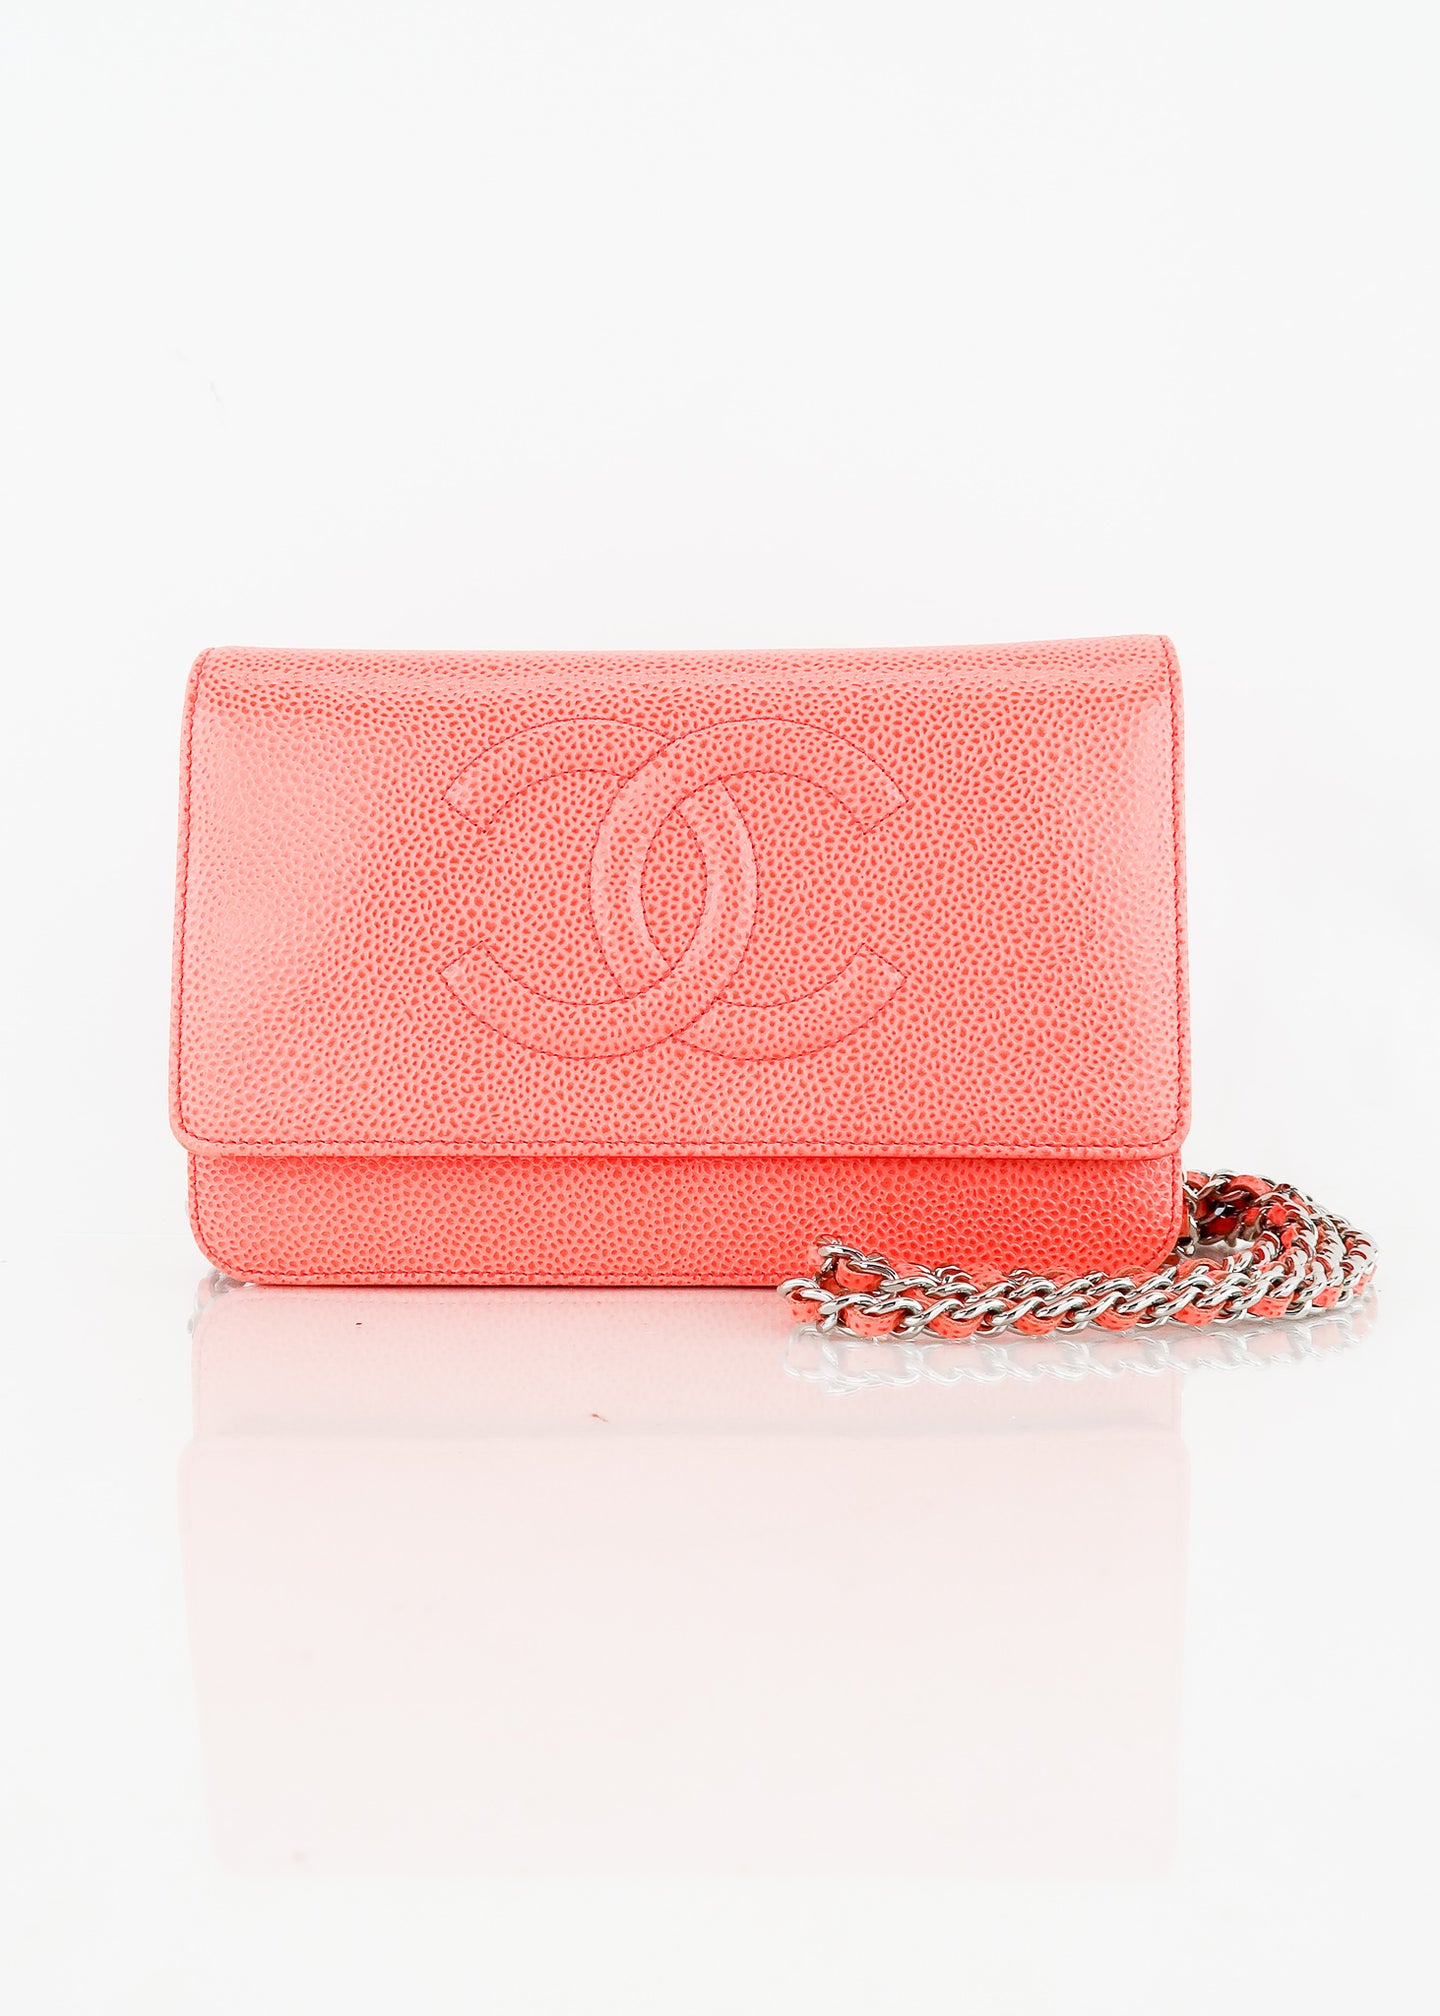 Another beauty from Chanel. Chanel wallet on chain (WOC) in Coral